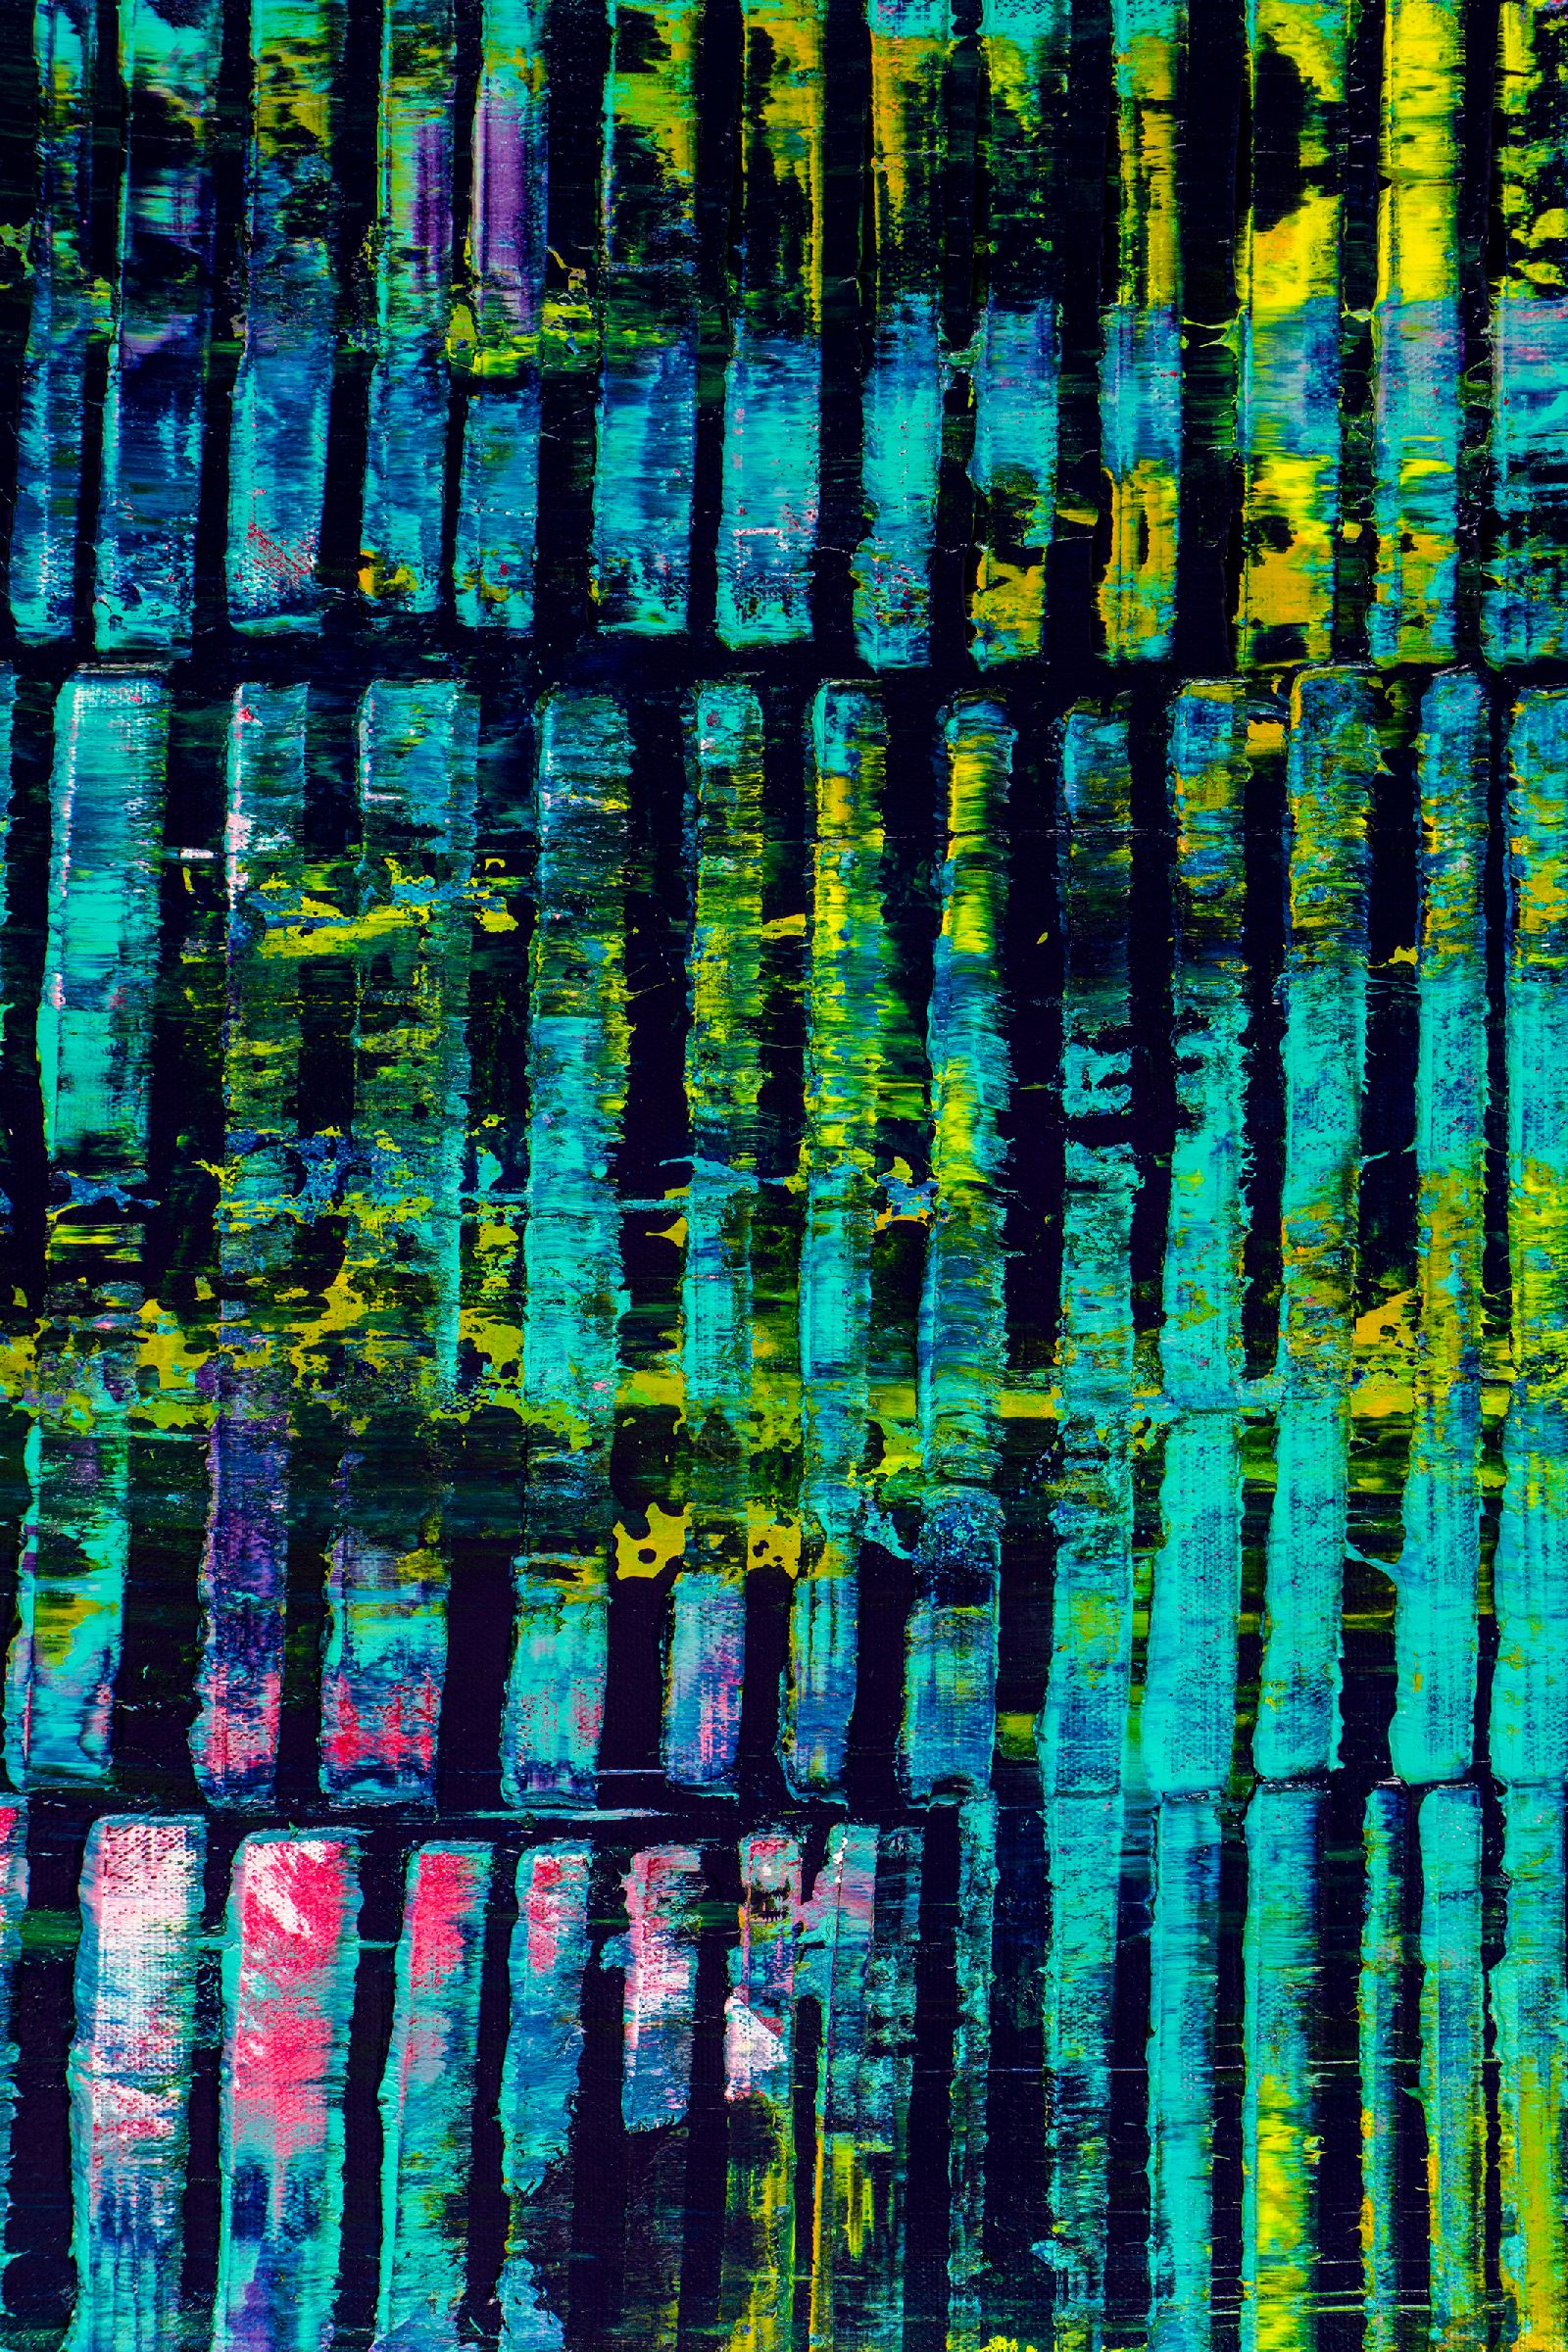 Detail - Modern spectra and lights (With Teal) (2020) by Nestor Toro